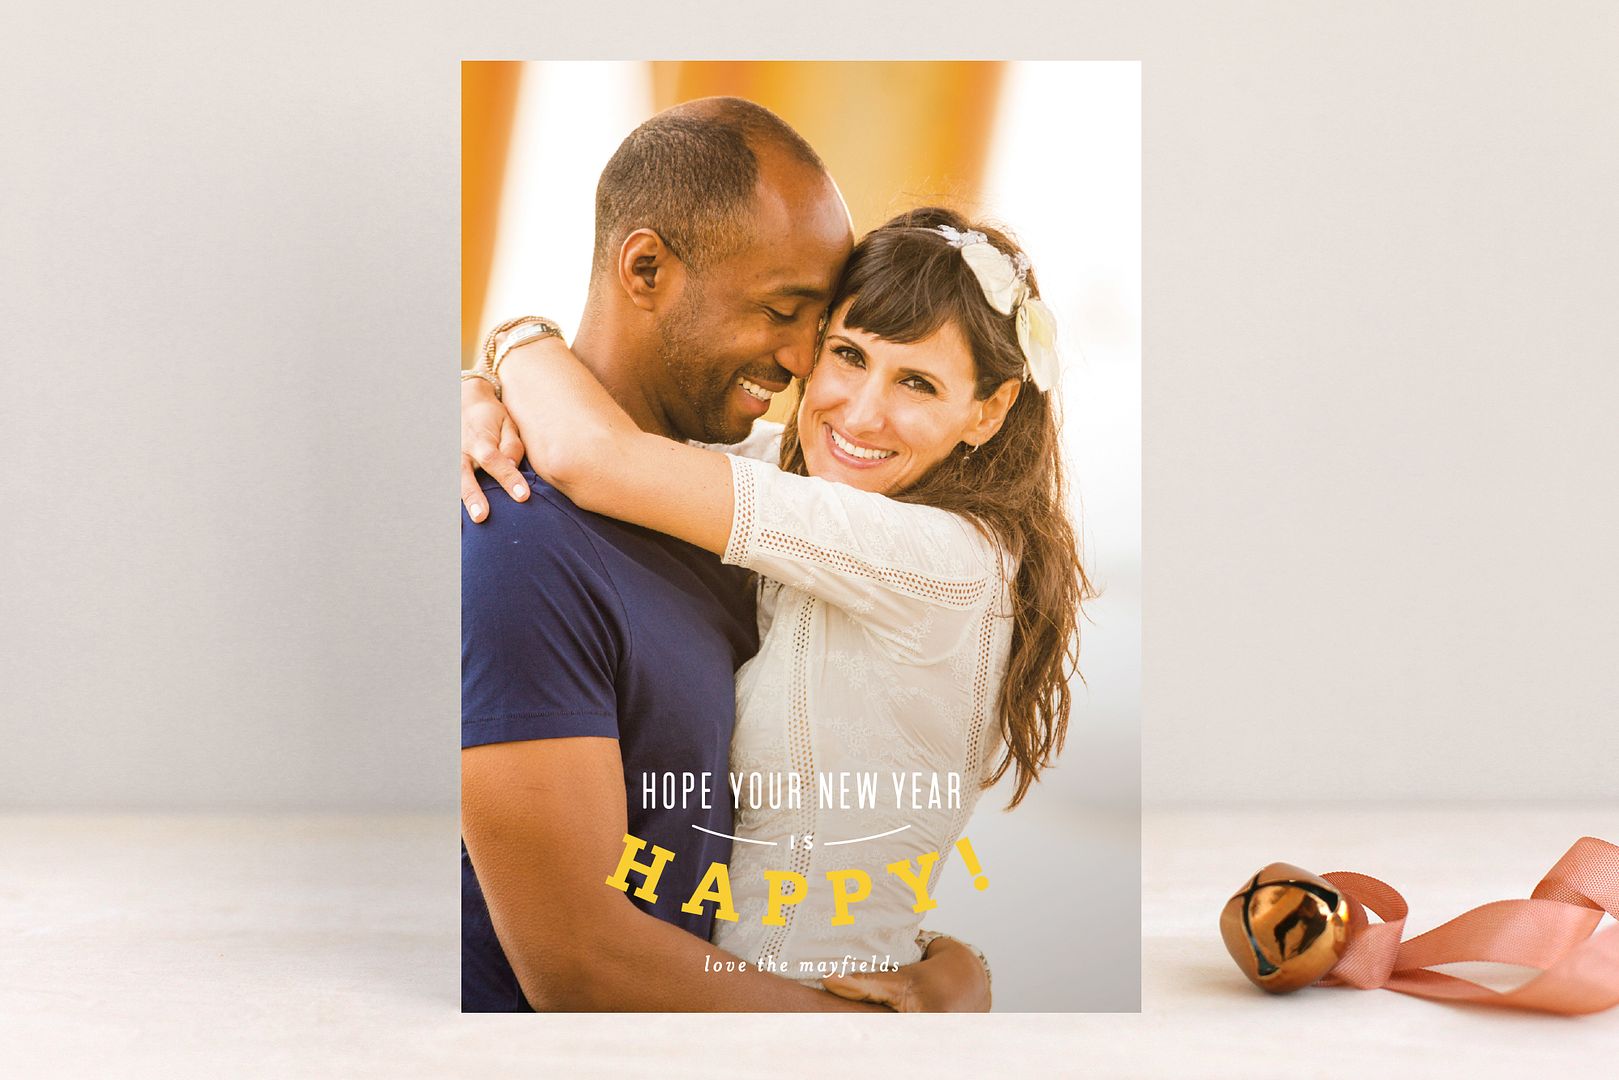 New Year Cards from Minted - www.theperfectpalette.com - 15% off with code: HOLIDAY15